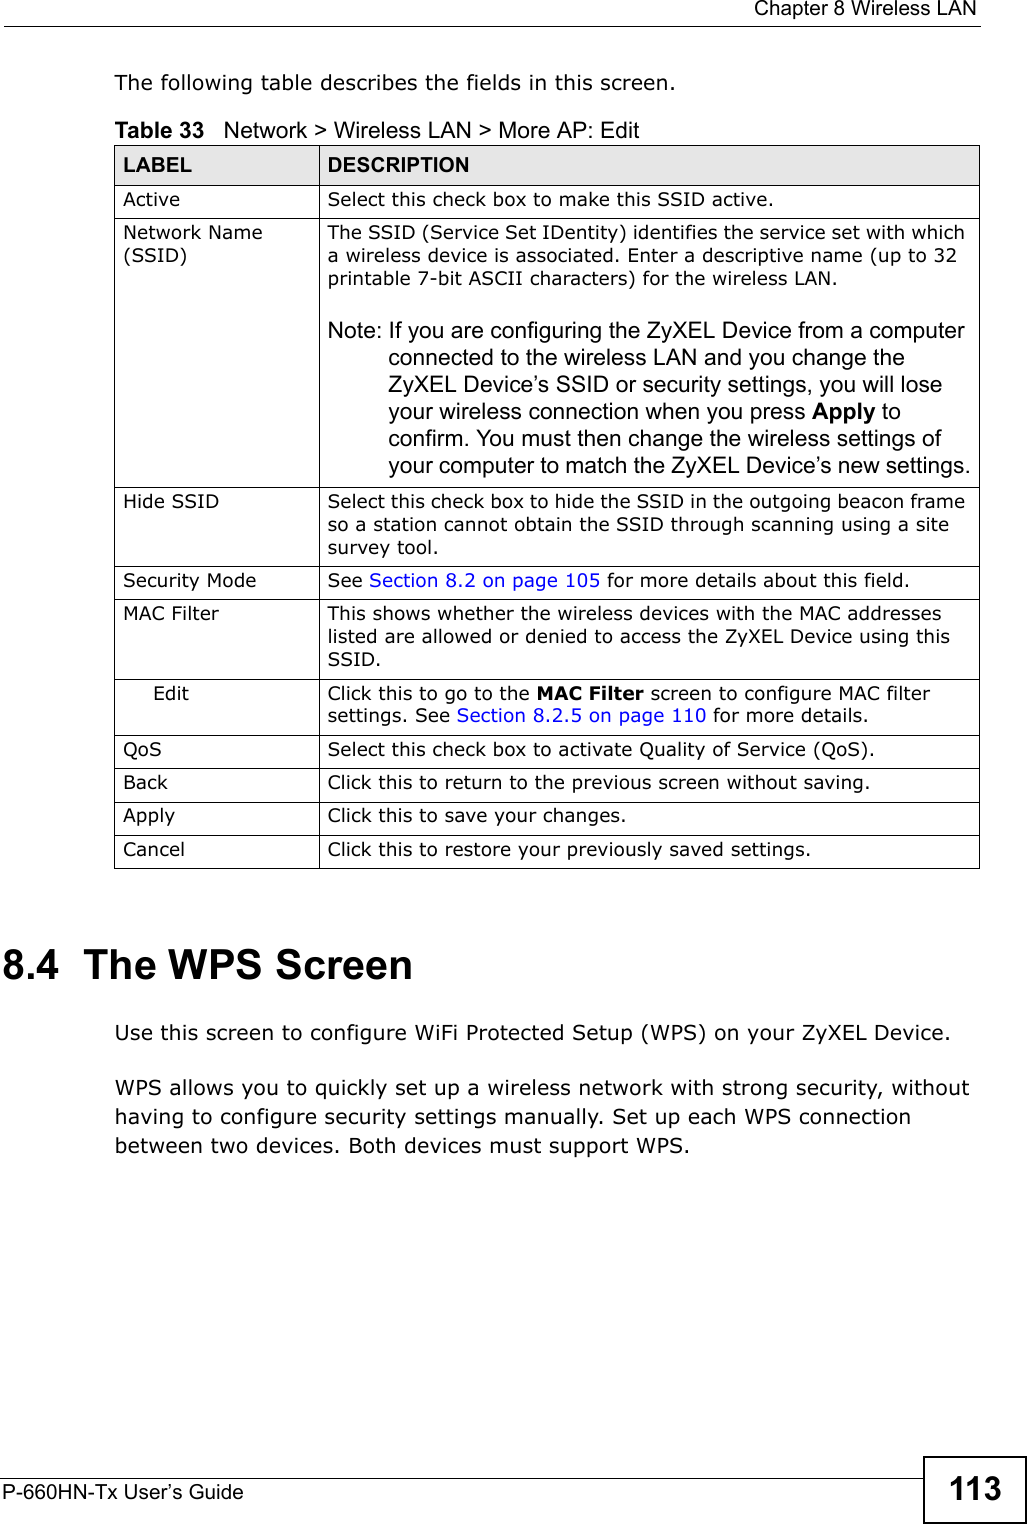  Chapter 8 Wireless LANP-660HN-Tx User’s Guide 113The following table describes the fields in this screen.8.4  The WPS ScreenUse this screen to configure WiFi Protected Setup (WPS) on your ZyXEL Device.WPS allows you to quickly set up a wireless network with strong security, without having to configure security settings manually. Set up each WPS connection between two devices. Both devices must support WPS.Table 33   Network &gt; Wireless LAN &gt; More AP: EditLABEL DESCRIPTIONActive Select this check box to make this SSID active.Network Name (SSID)The SSID (Service Set IDentity) identifies the service set with which a wireless device is associated. Enter a descriptive name (up to 32 printable 7-bit ASCII characters) for the wireless LAN. Note: If you are configuring the ZyXEL Device from a computer connected to the wireless LAN and you change the ZyXEL Device’s SSID or security settings, you will lose your wireless connection when you press Apply to confirm. You must then change the wireless settings of your computer to match the ZyXEL Device’s new settings.Hide SSID Select this check box to hide the SSID in the outgoing beacon frame so a station cannot obtain the SSID through scanning using a site survey tool.Security Mode See Section 8.2 on page 105 for more details about this field.MAC Filter  This shows whether the wireless devices with the MAC addresses listed are allowed or denied to access the ZyXEL Device using this SSID.Edit Click this to go to the MAC Filter screen to configure MAC filter settings. See Section 8.2.5 on page 110 for more details.QoS Select this check box to activate Quality of Service (QoS).Back Click this to return to the previous screen without saving.Apply Click this to save your changes.Cancel Click this to restore your previously saved settings.